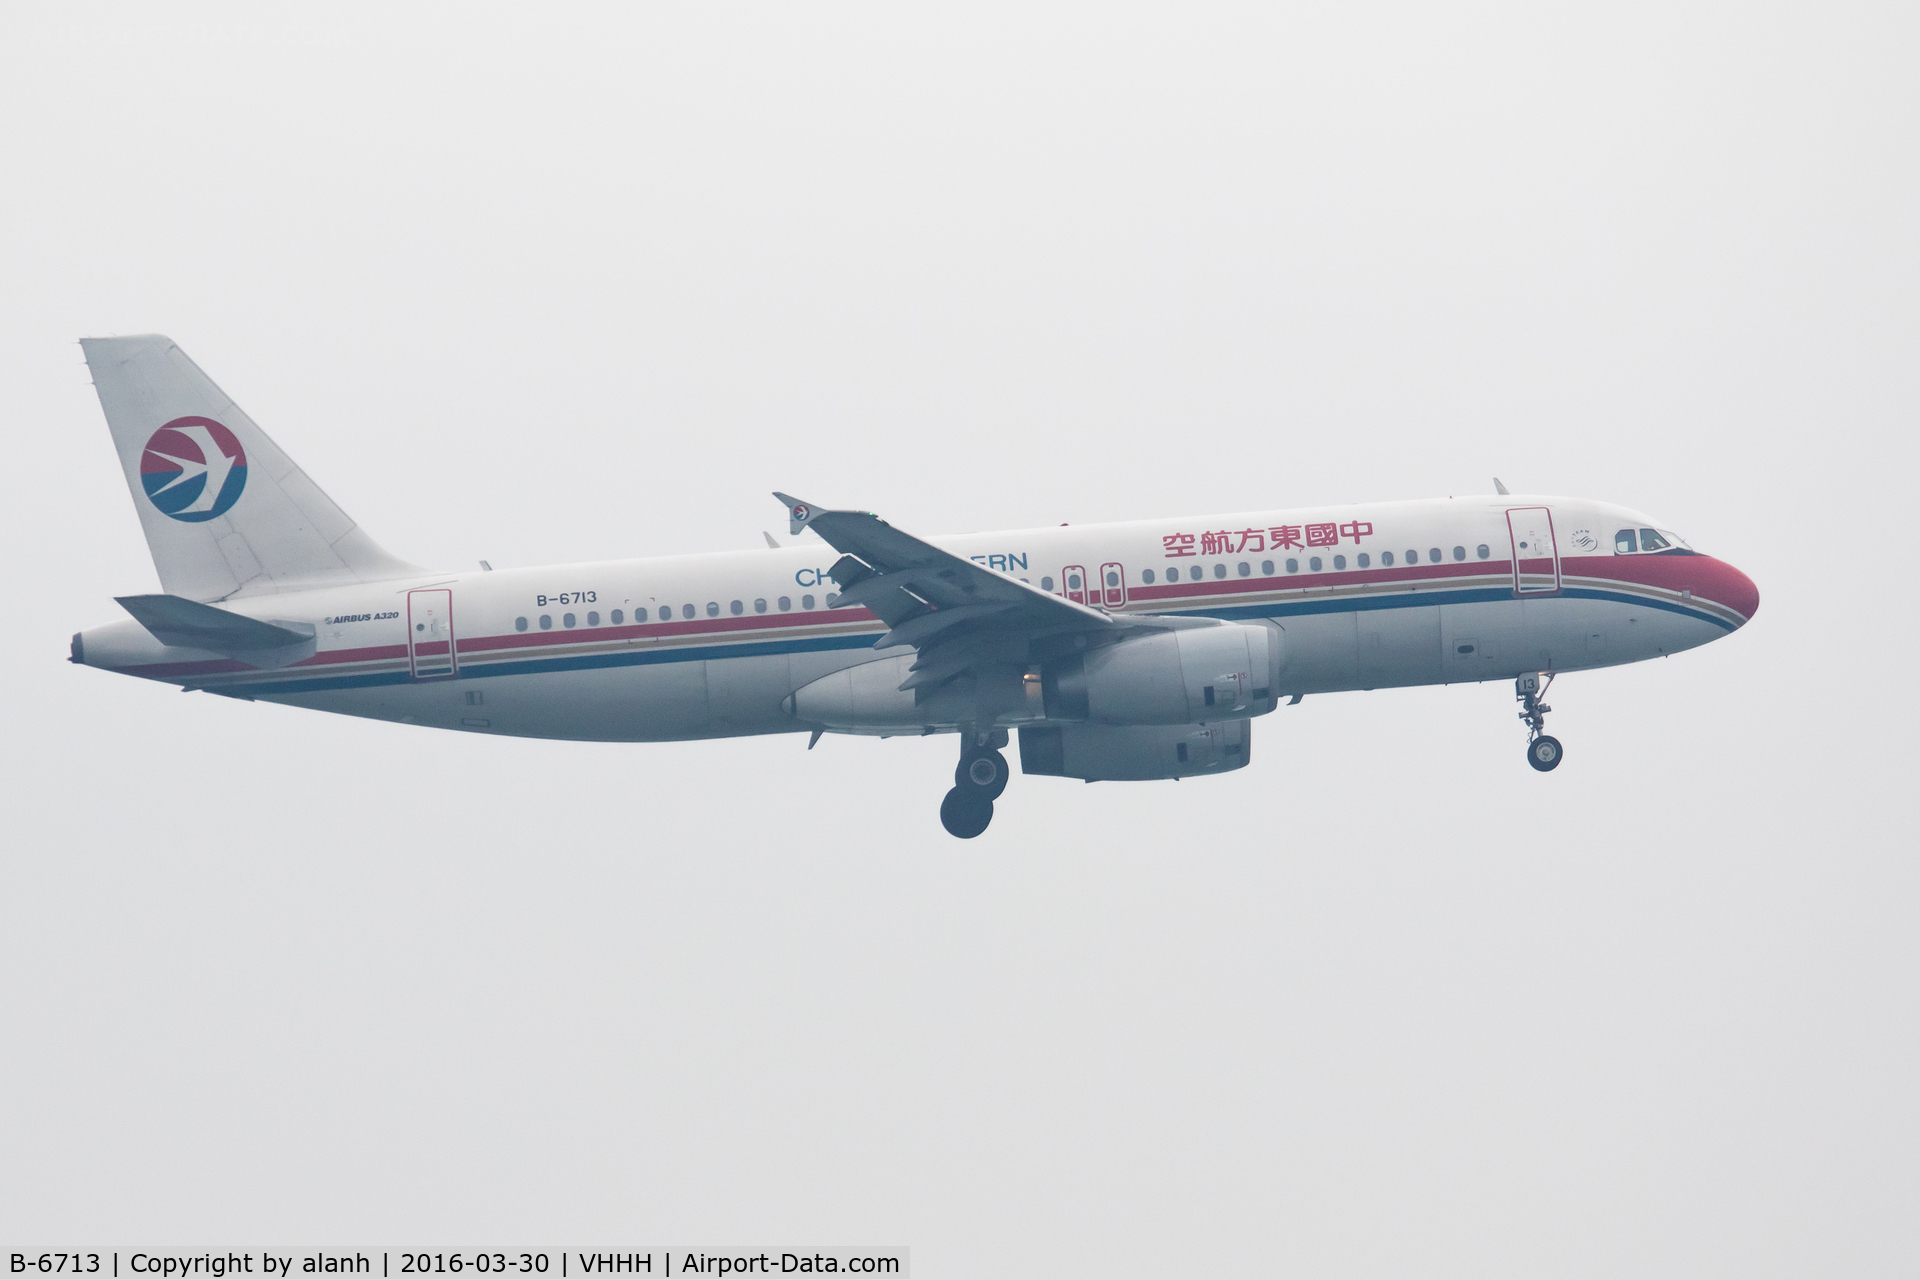 B-6713, 2010 Airbus A320-232 C/N 4342, On finals for Hong Kong, inbound from Shanghai Pudong Int'l